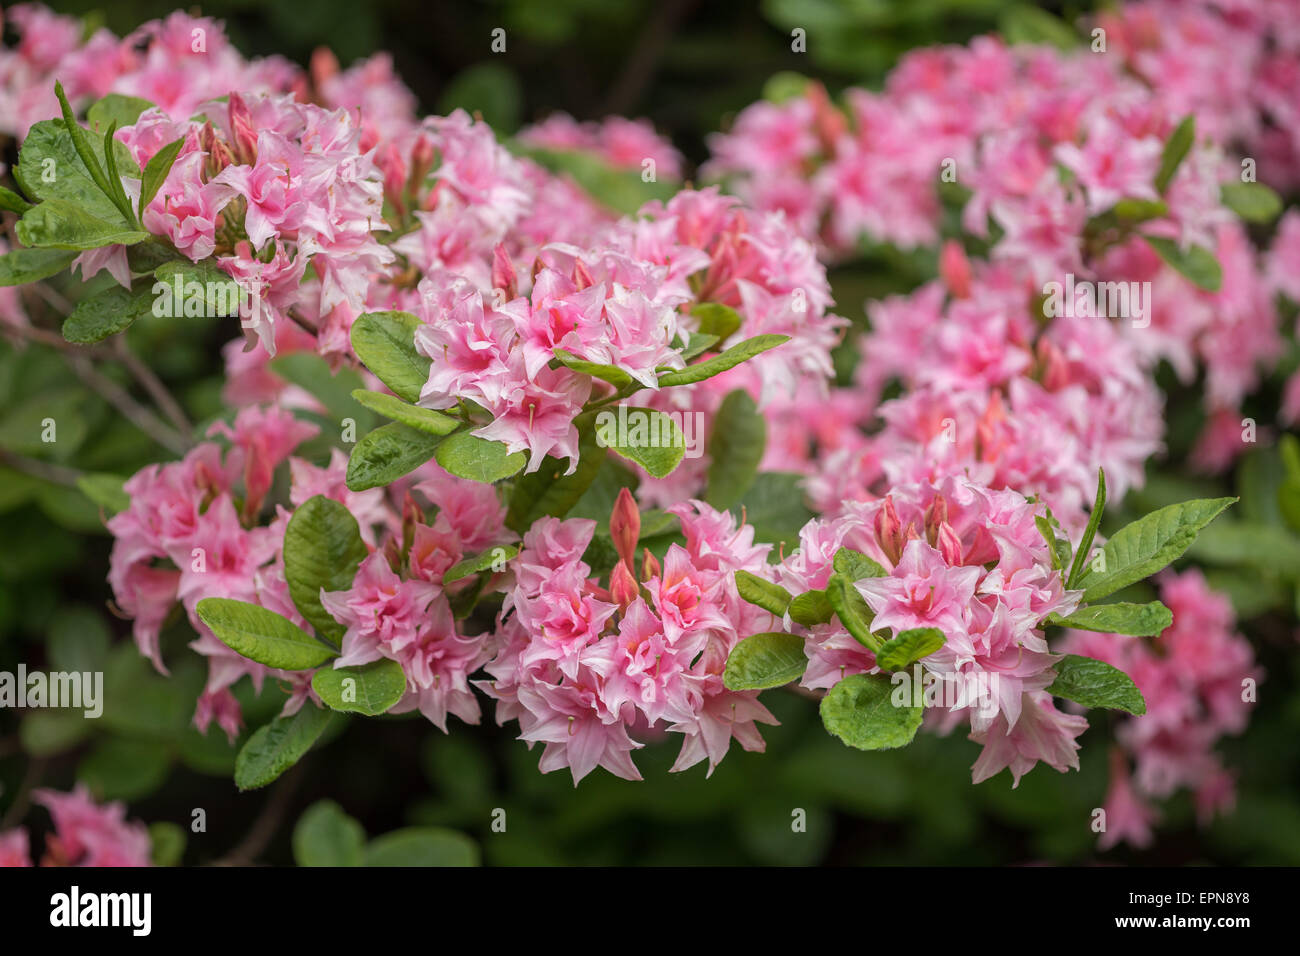 Rhododendron Aida pink rich blossom Stock Photo